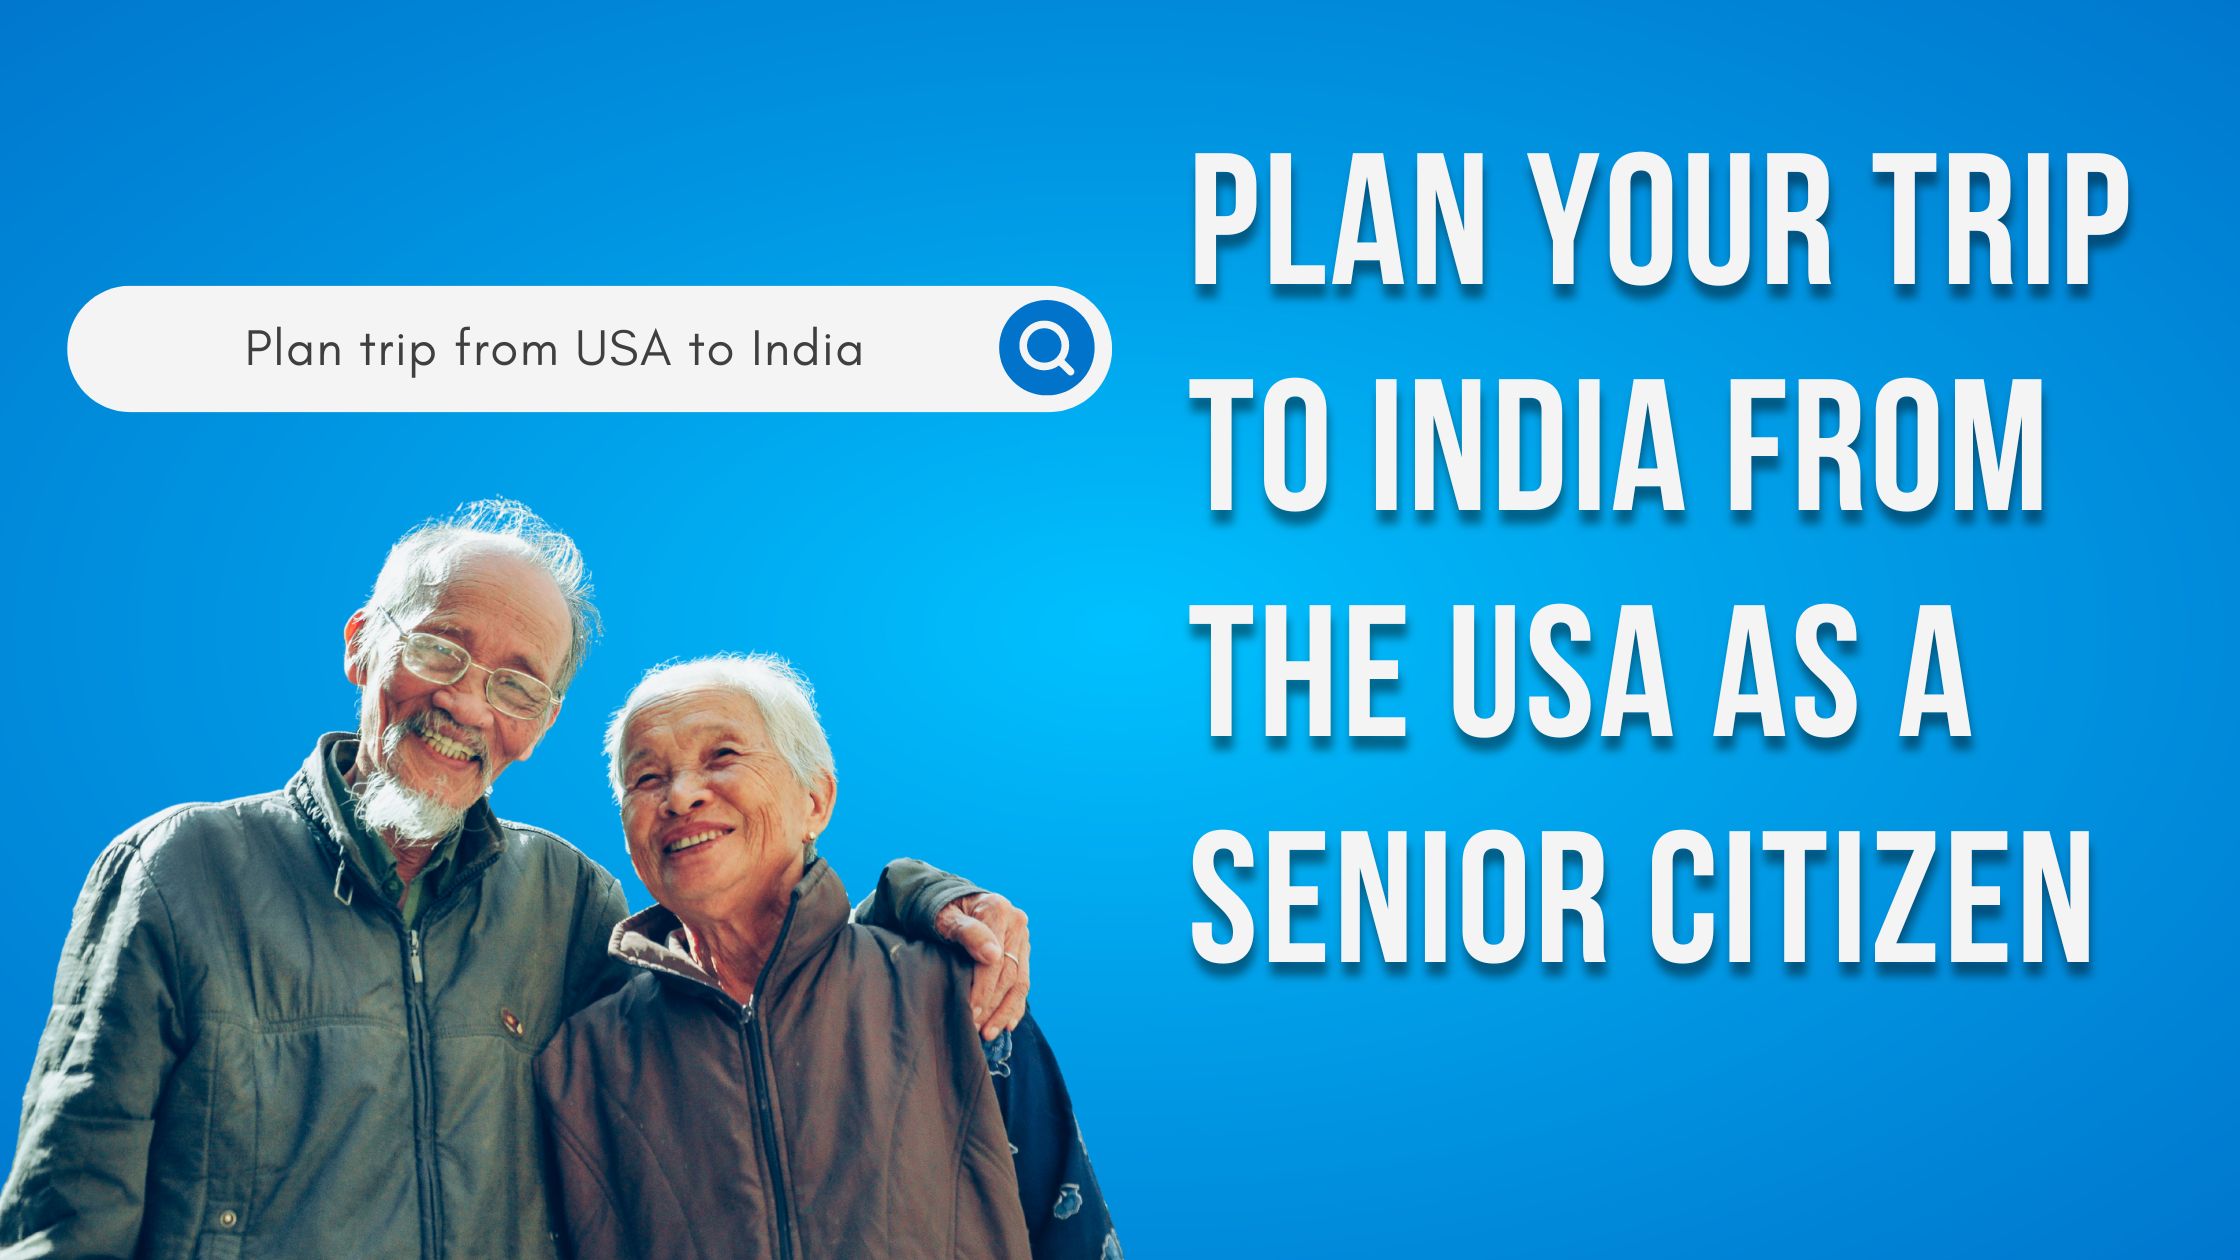 Plan Your Trip to India from the USA as a Senior Citizen